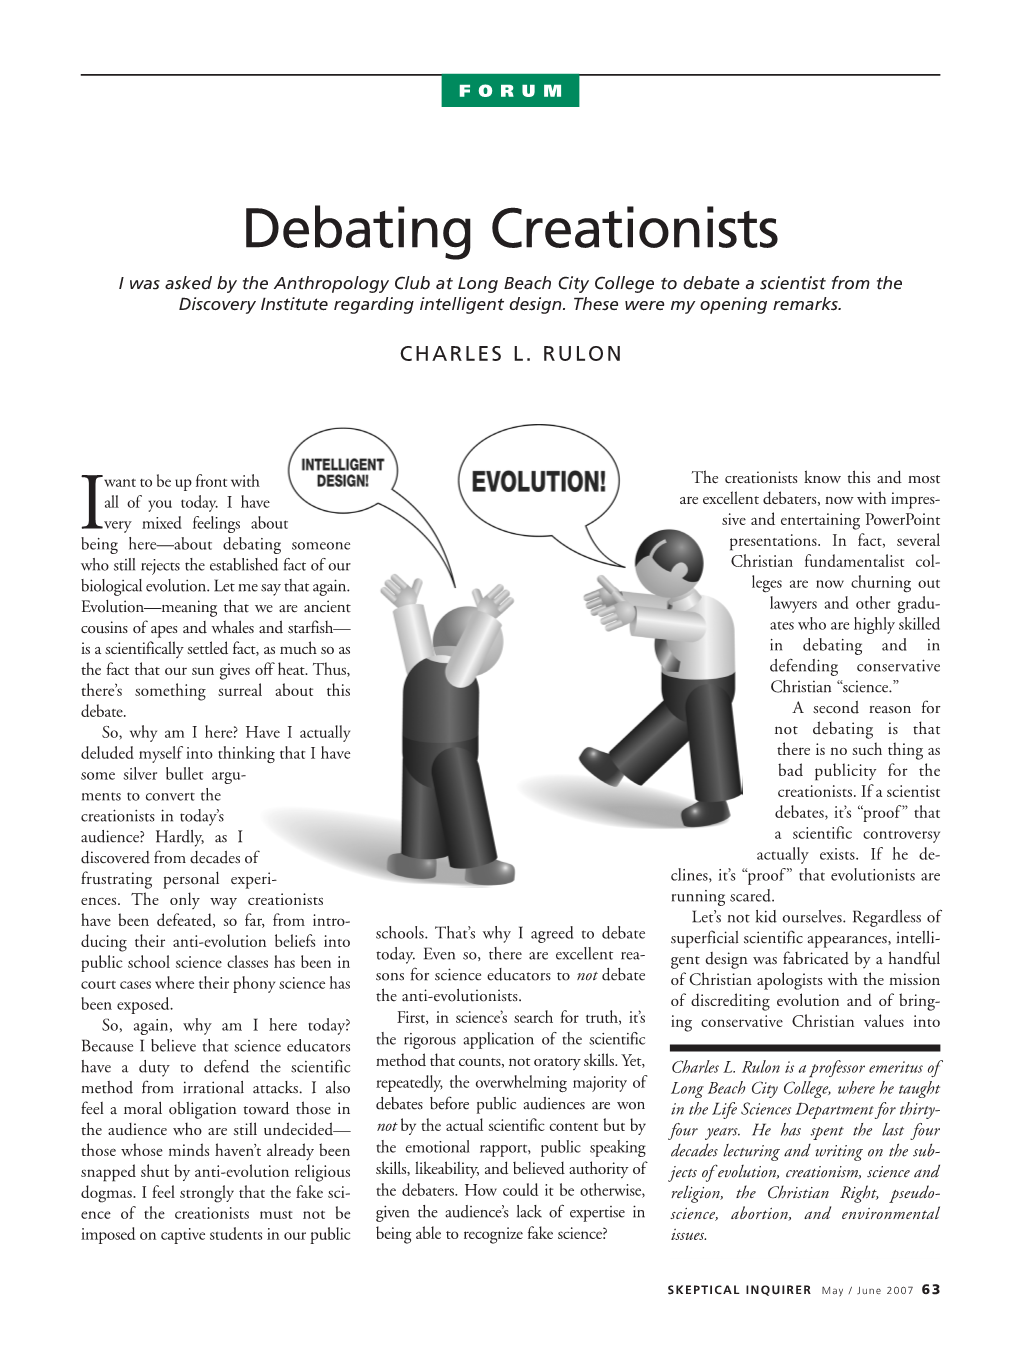 Debating Creationists I Was Asked by the Anthropology Club at Long Beach City College to Debate a Scientist from the Discovery Institute Regarding Intelligent Design